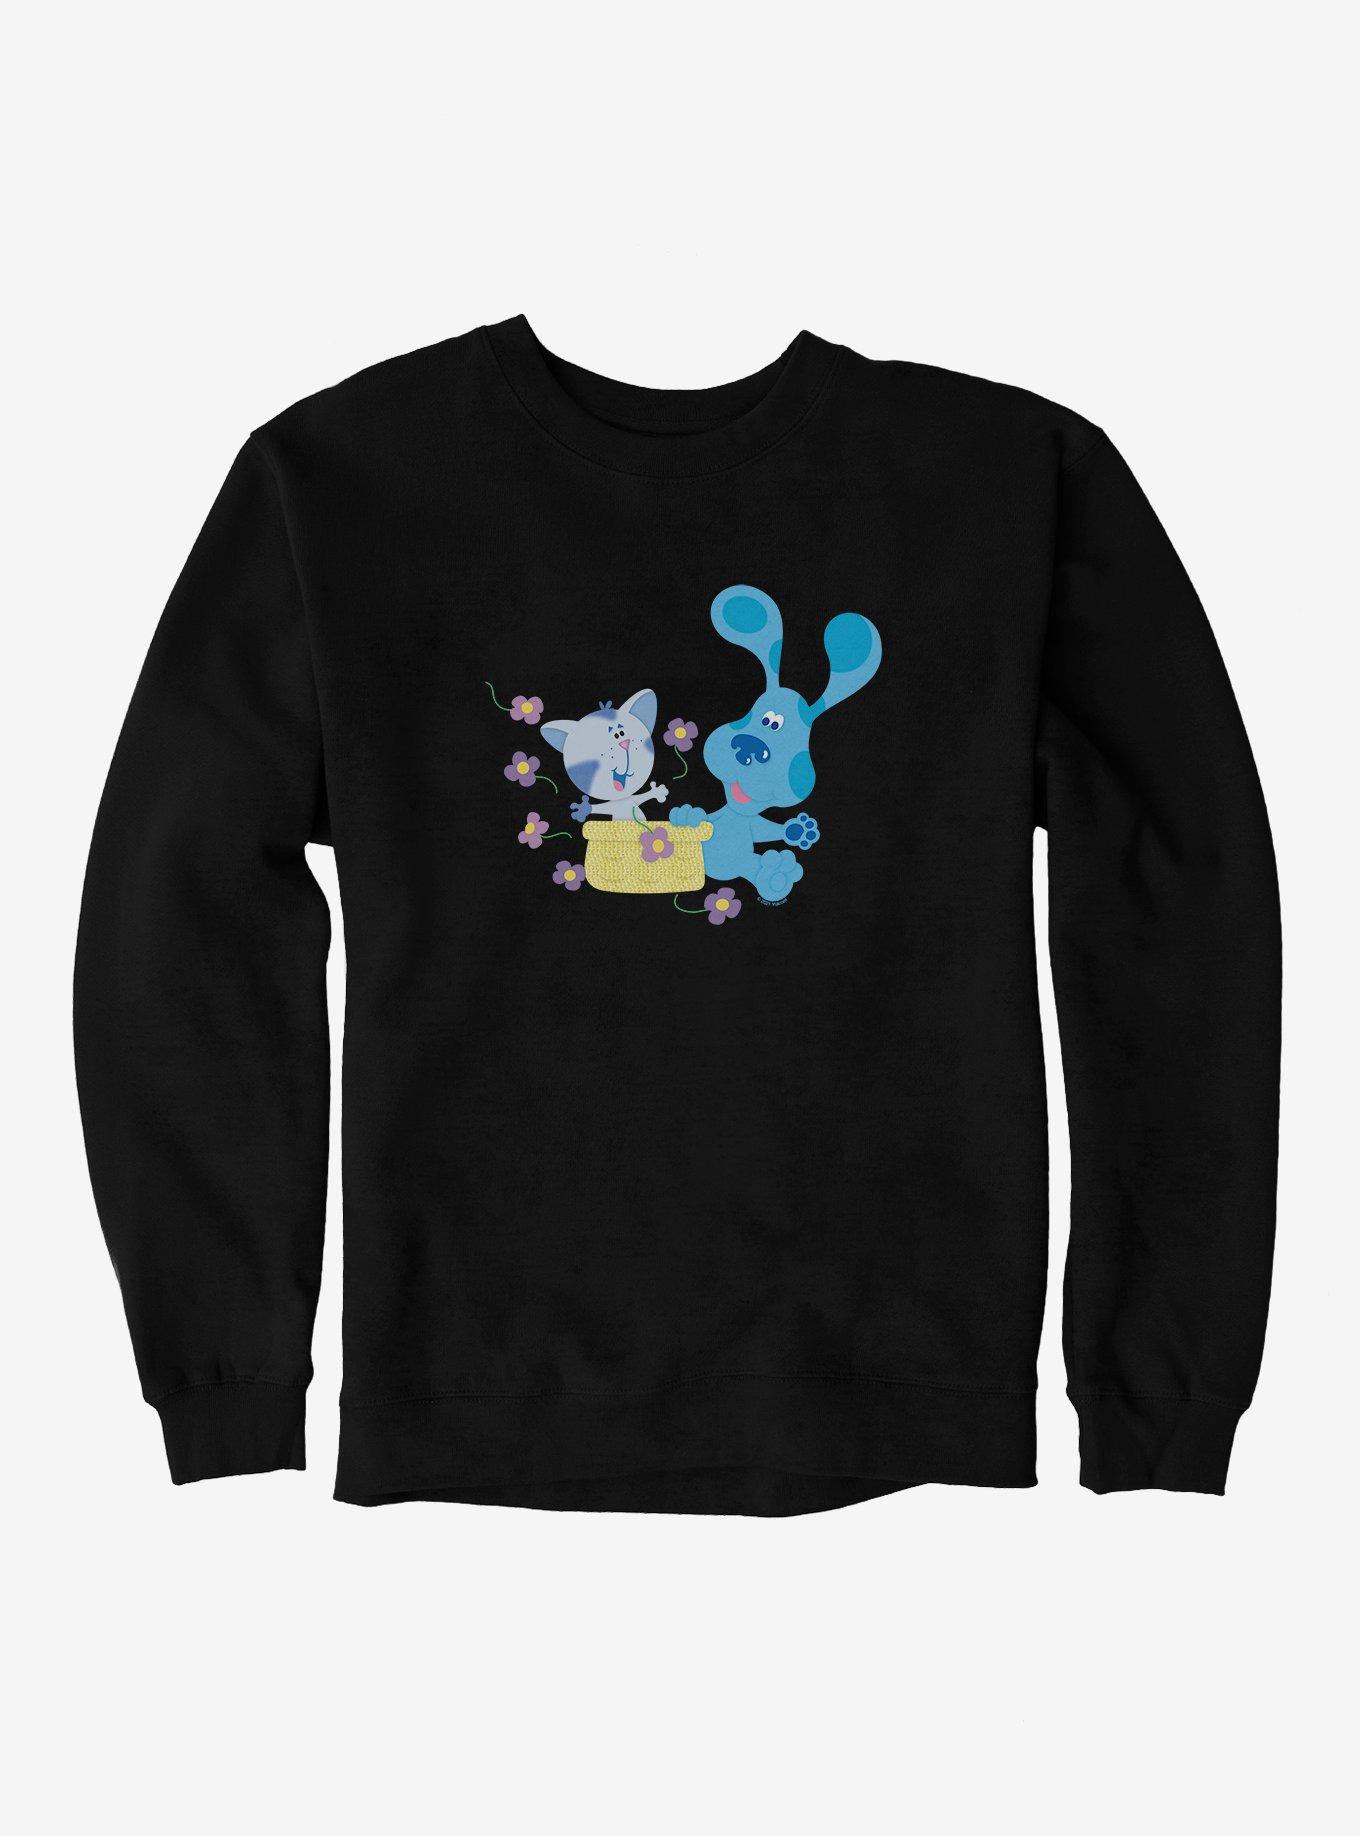 Hot Topic Blue's Clues Periwinkle And Blue Surprise Sweatshirt